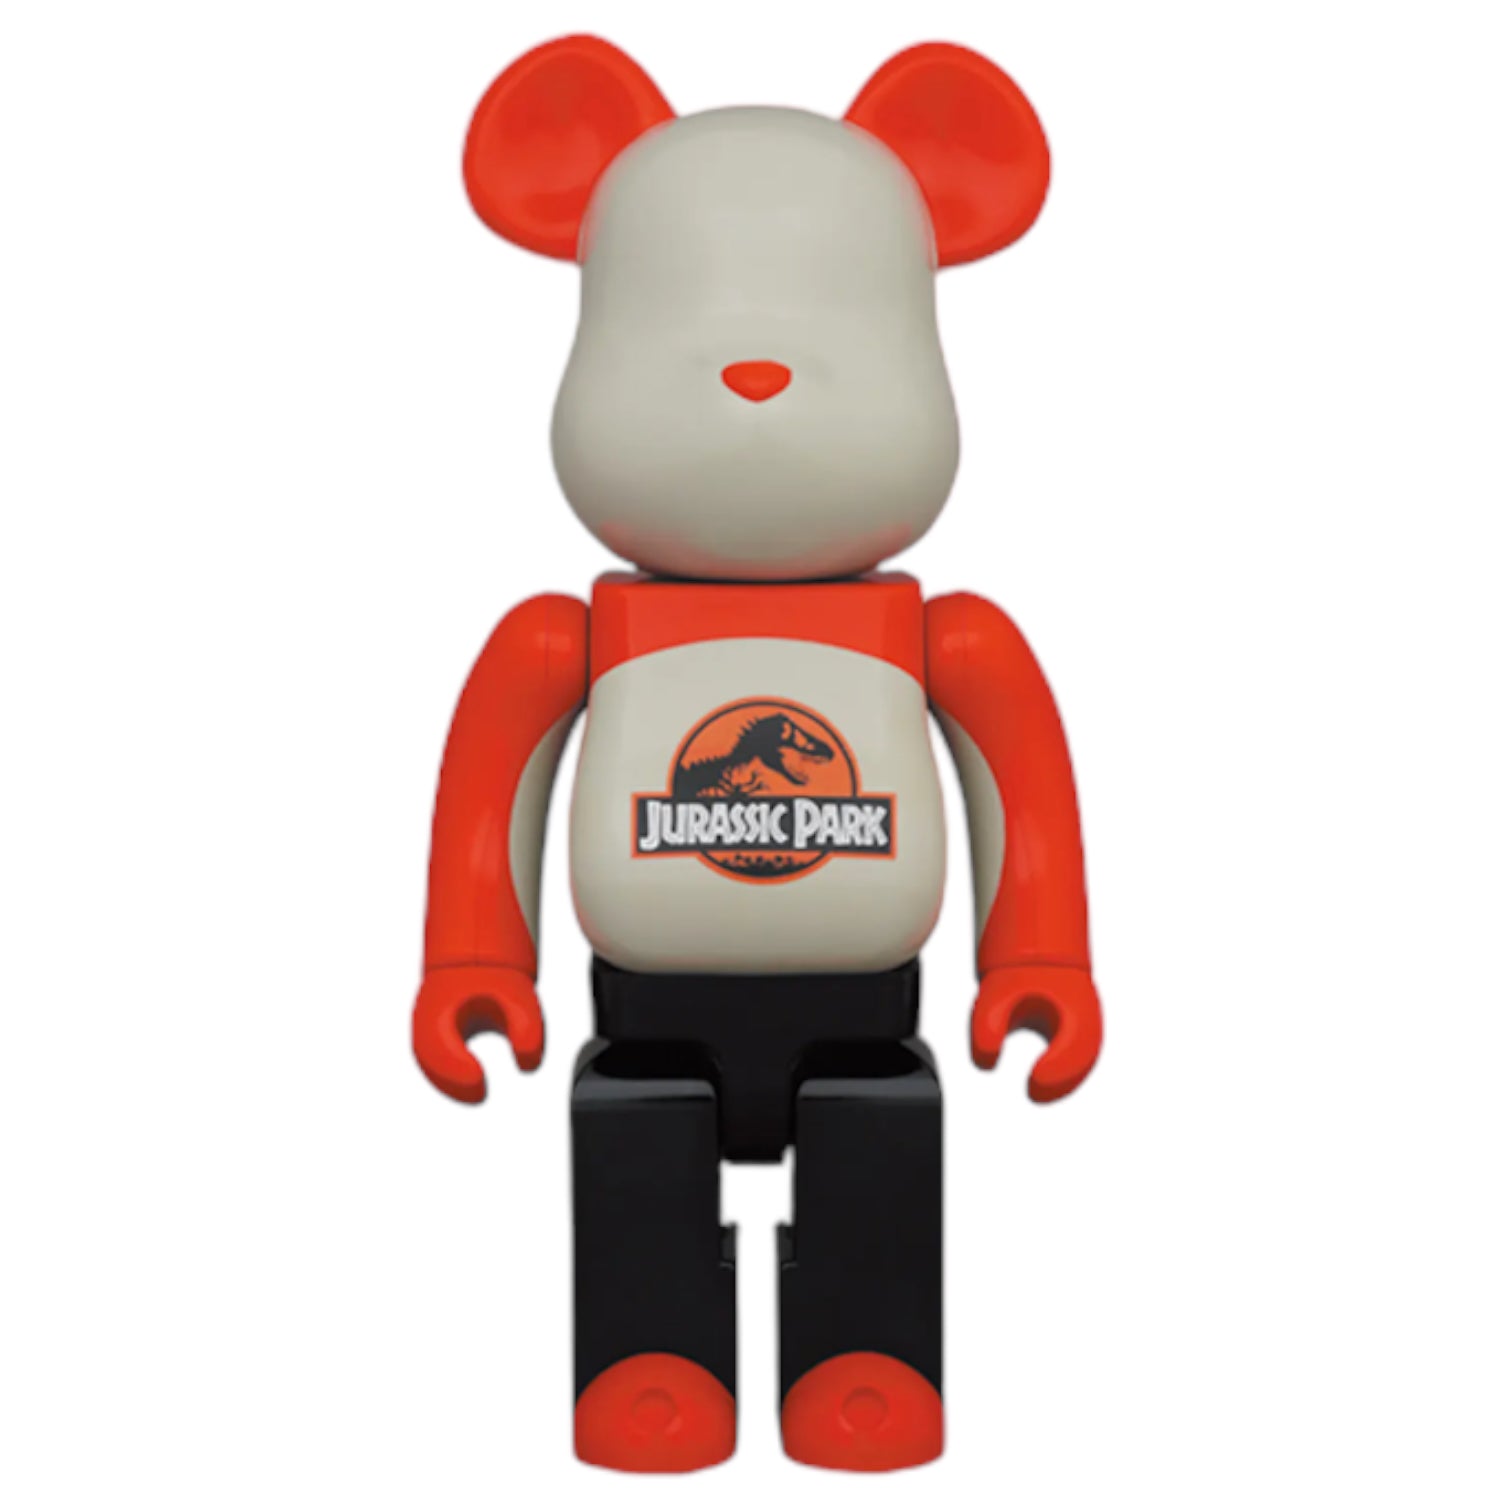 Bearbrick Jurassic Park 1000% - Red and White Collectible Figurine